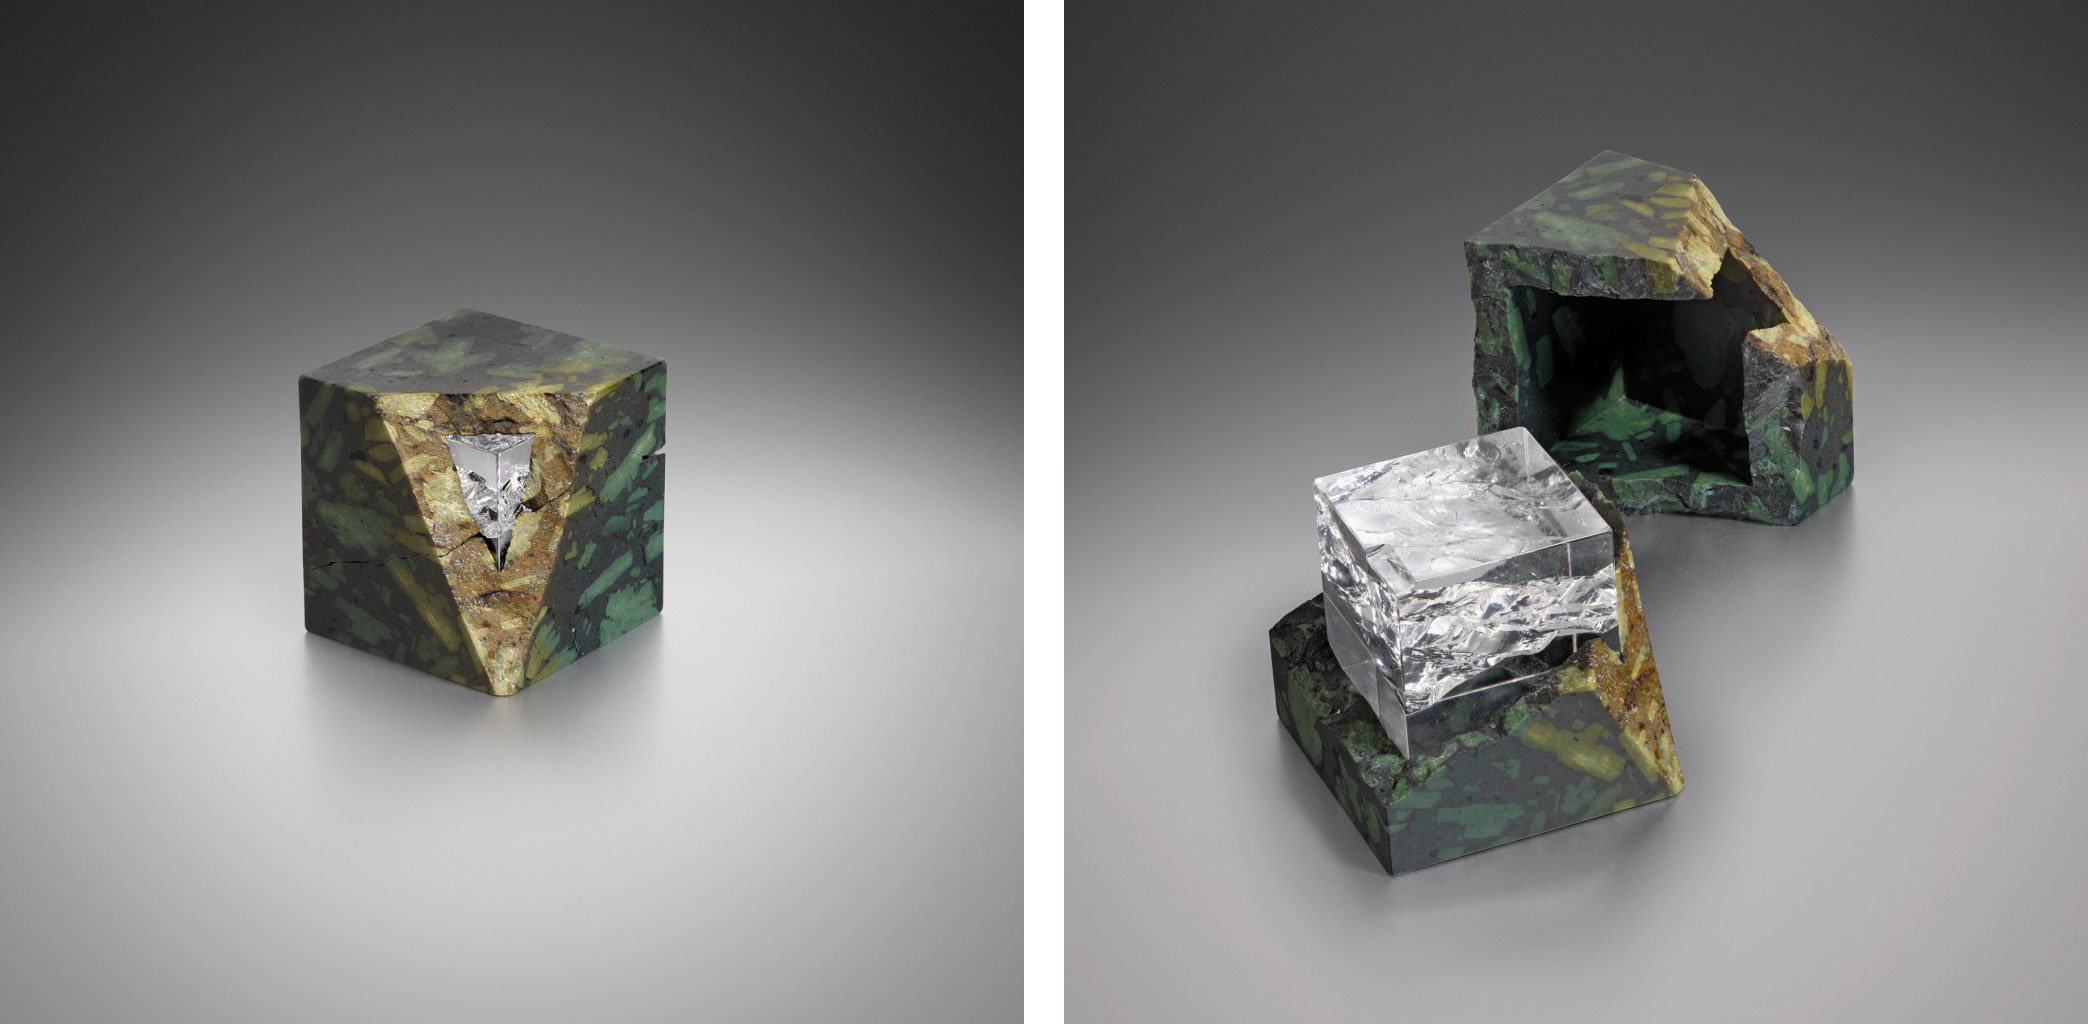 Ben Gaskell, Breakbox with Split Crystal (left: closed; right: open), 2016, serpentino porphyry, rock crystal, Los Angeles County Museum of Art, gift of the 2020 Decorative Arts and Design Acquisitions Committee (DA²) in memory of Peter Loughrey, © Ben Gaskell, photos courtesy Adrian Sassoon, London